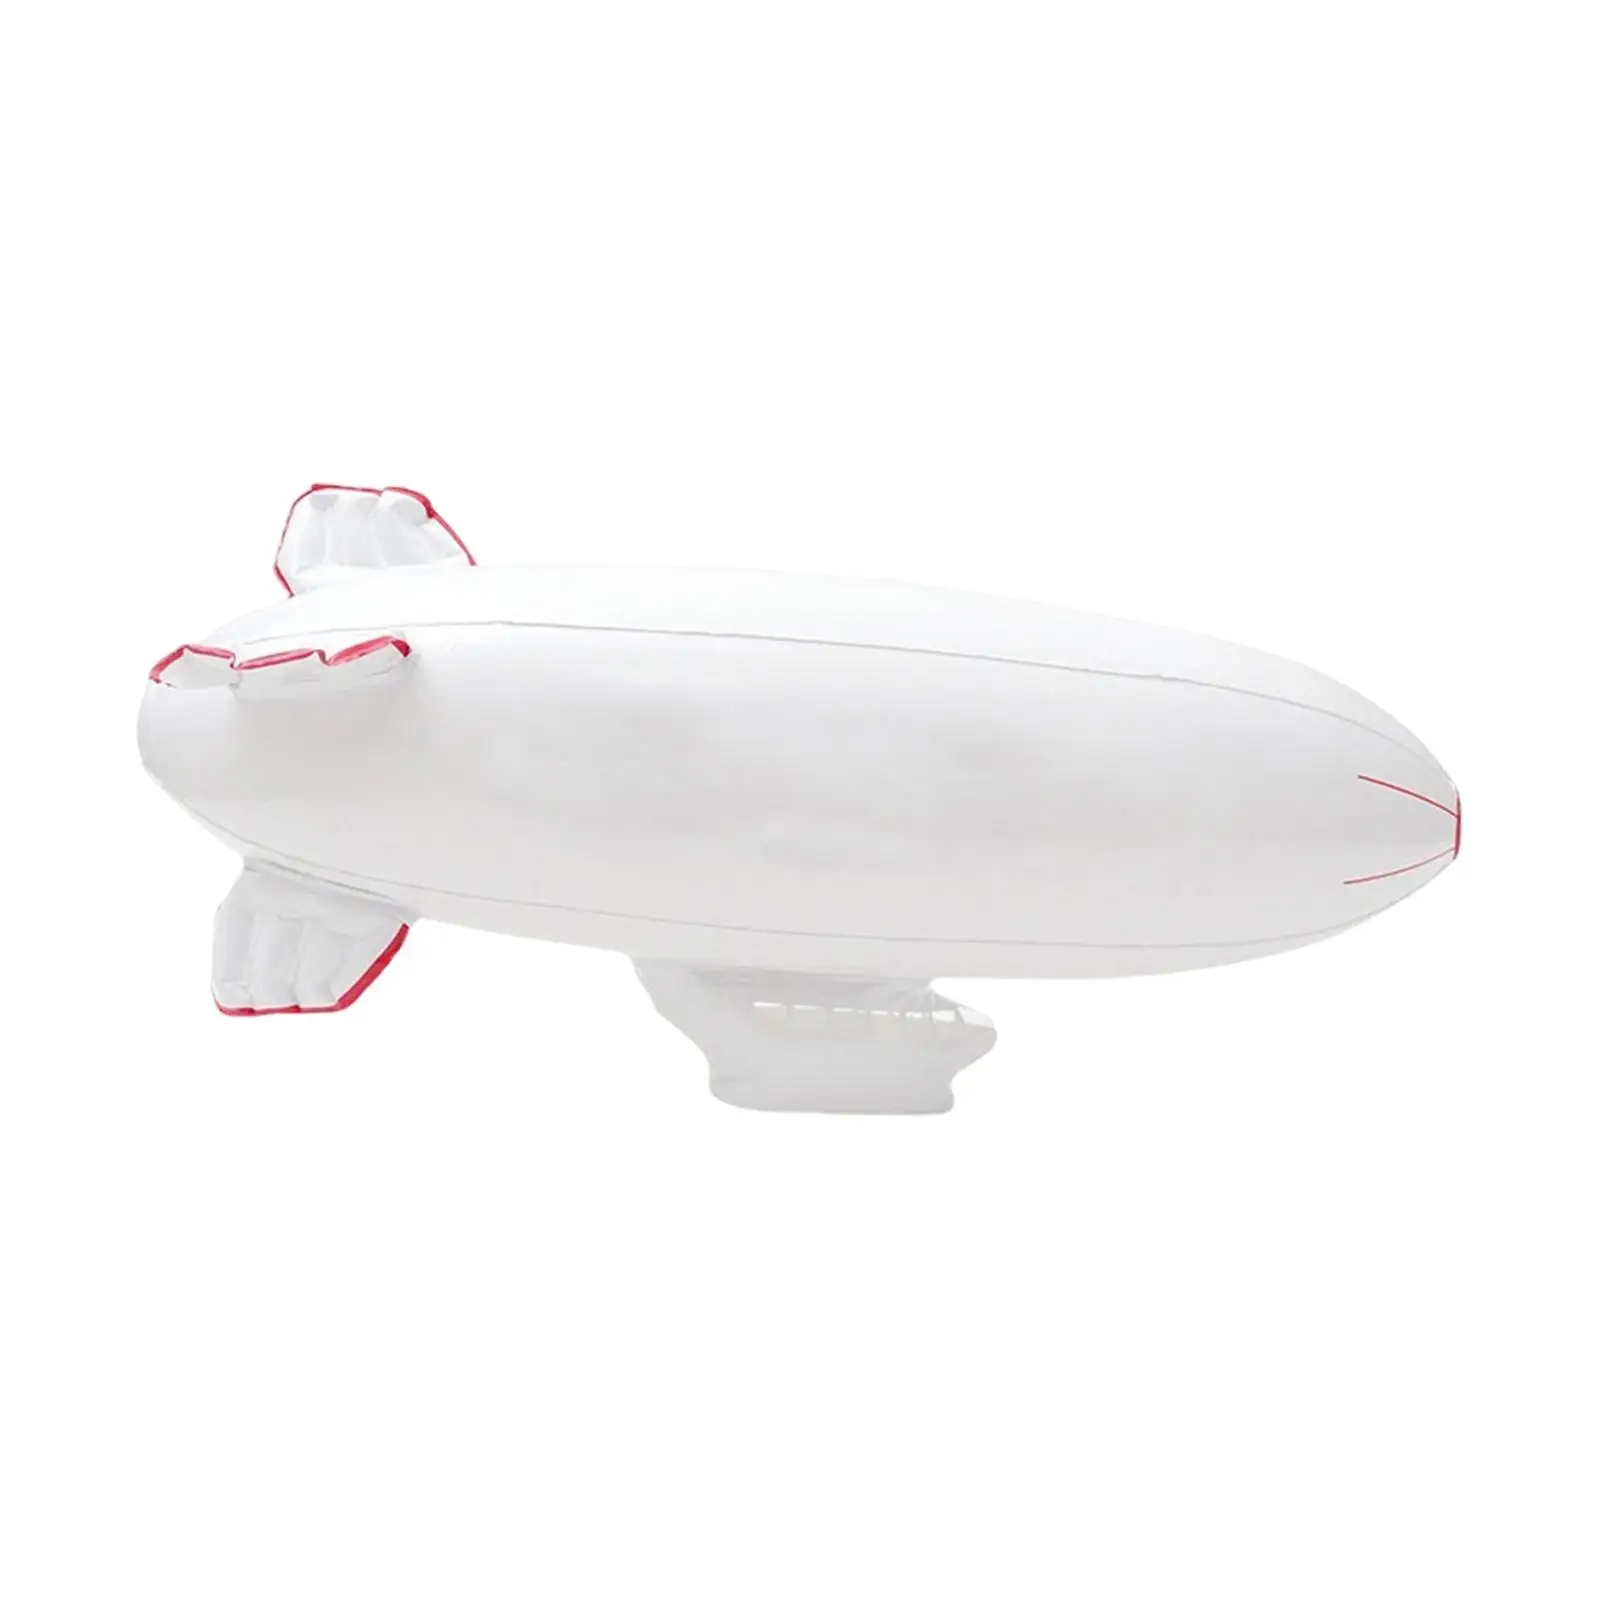 Inflatable Airship Model Save Space Collapsiblefoldable Spaceship Model for Celebration Birthday Wedding Theme Party Ornaments